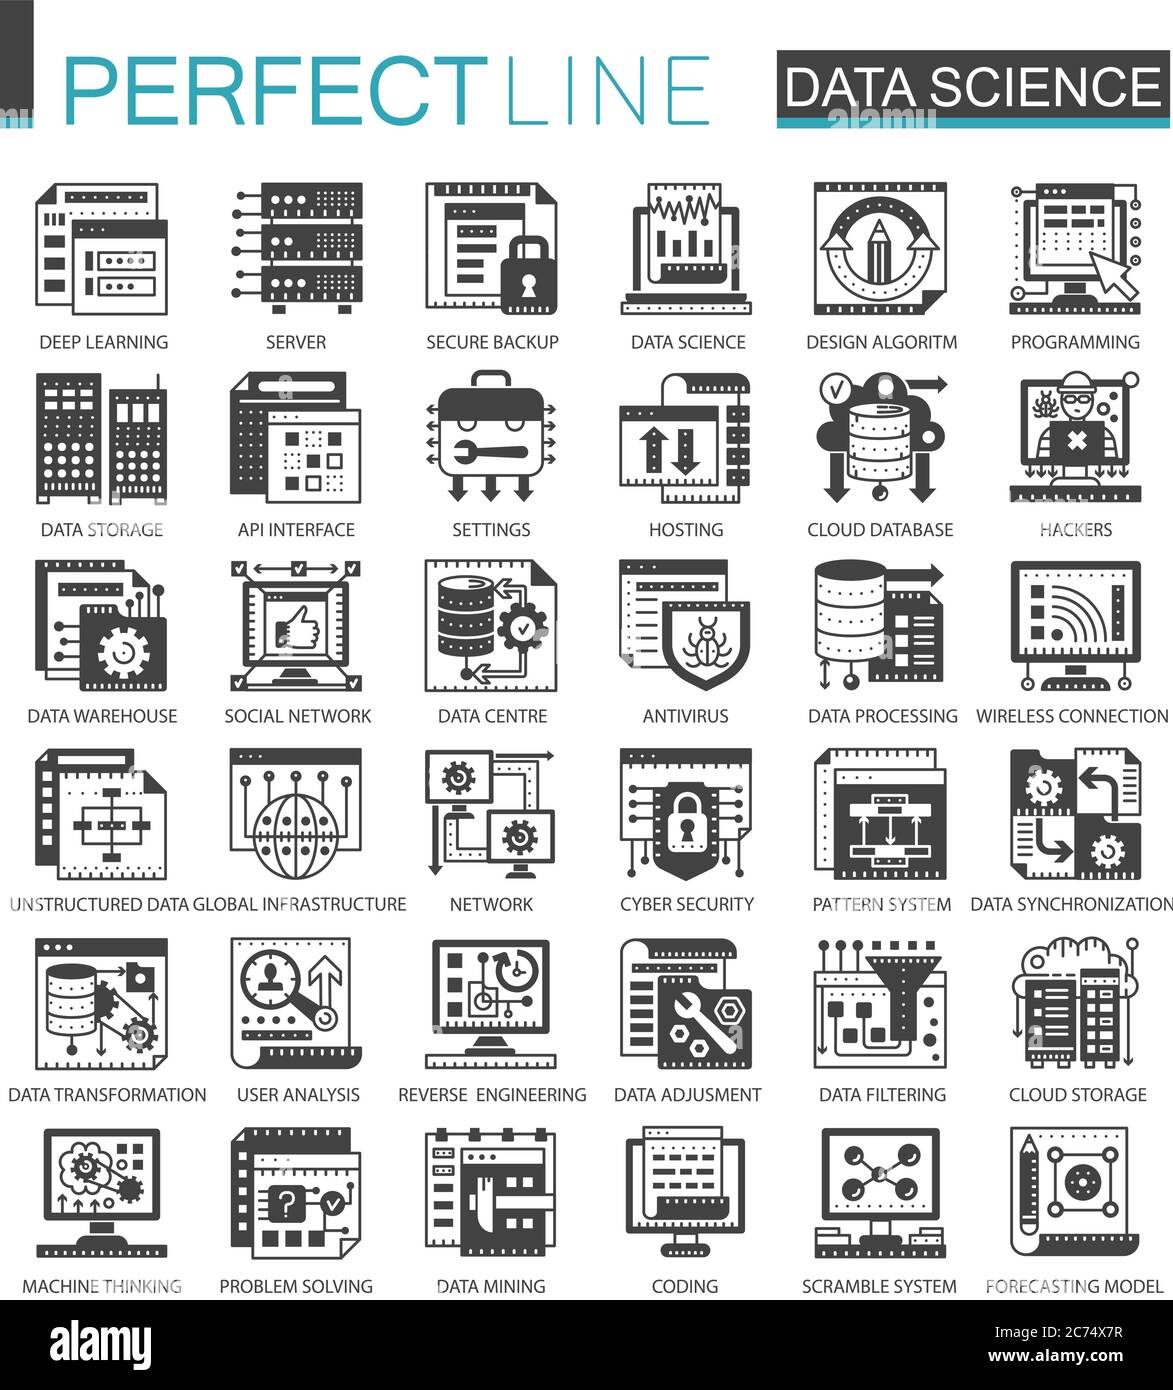 Data science technology classic black mini concept symbols. Machine learning process modern icon pictogram vector illustrations set Stock Vector